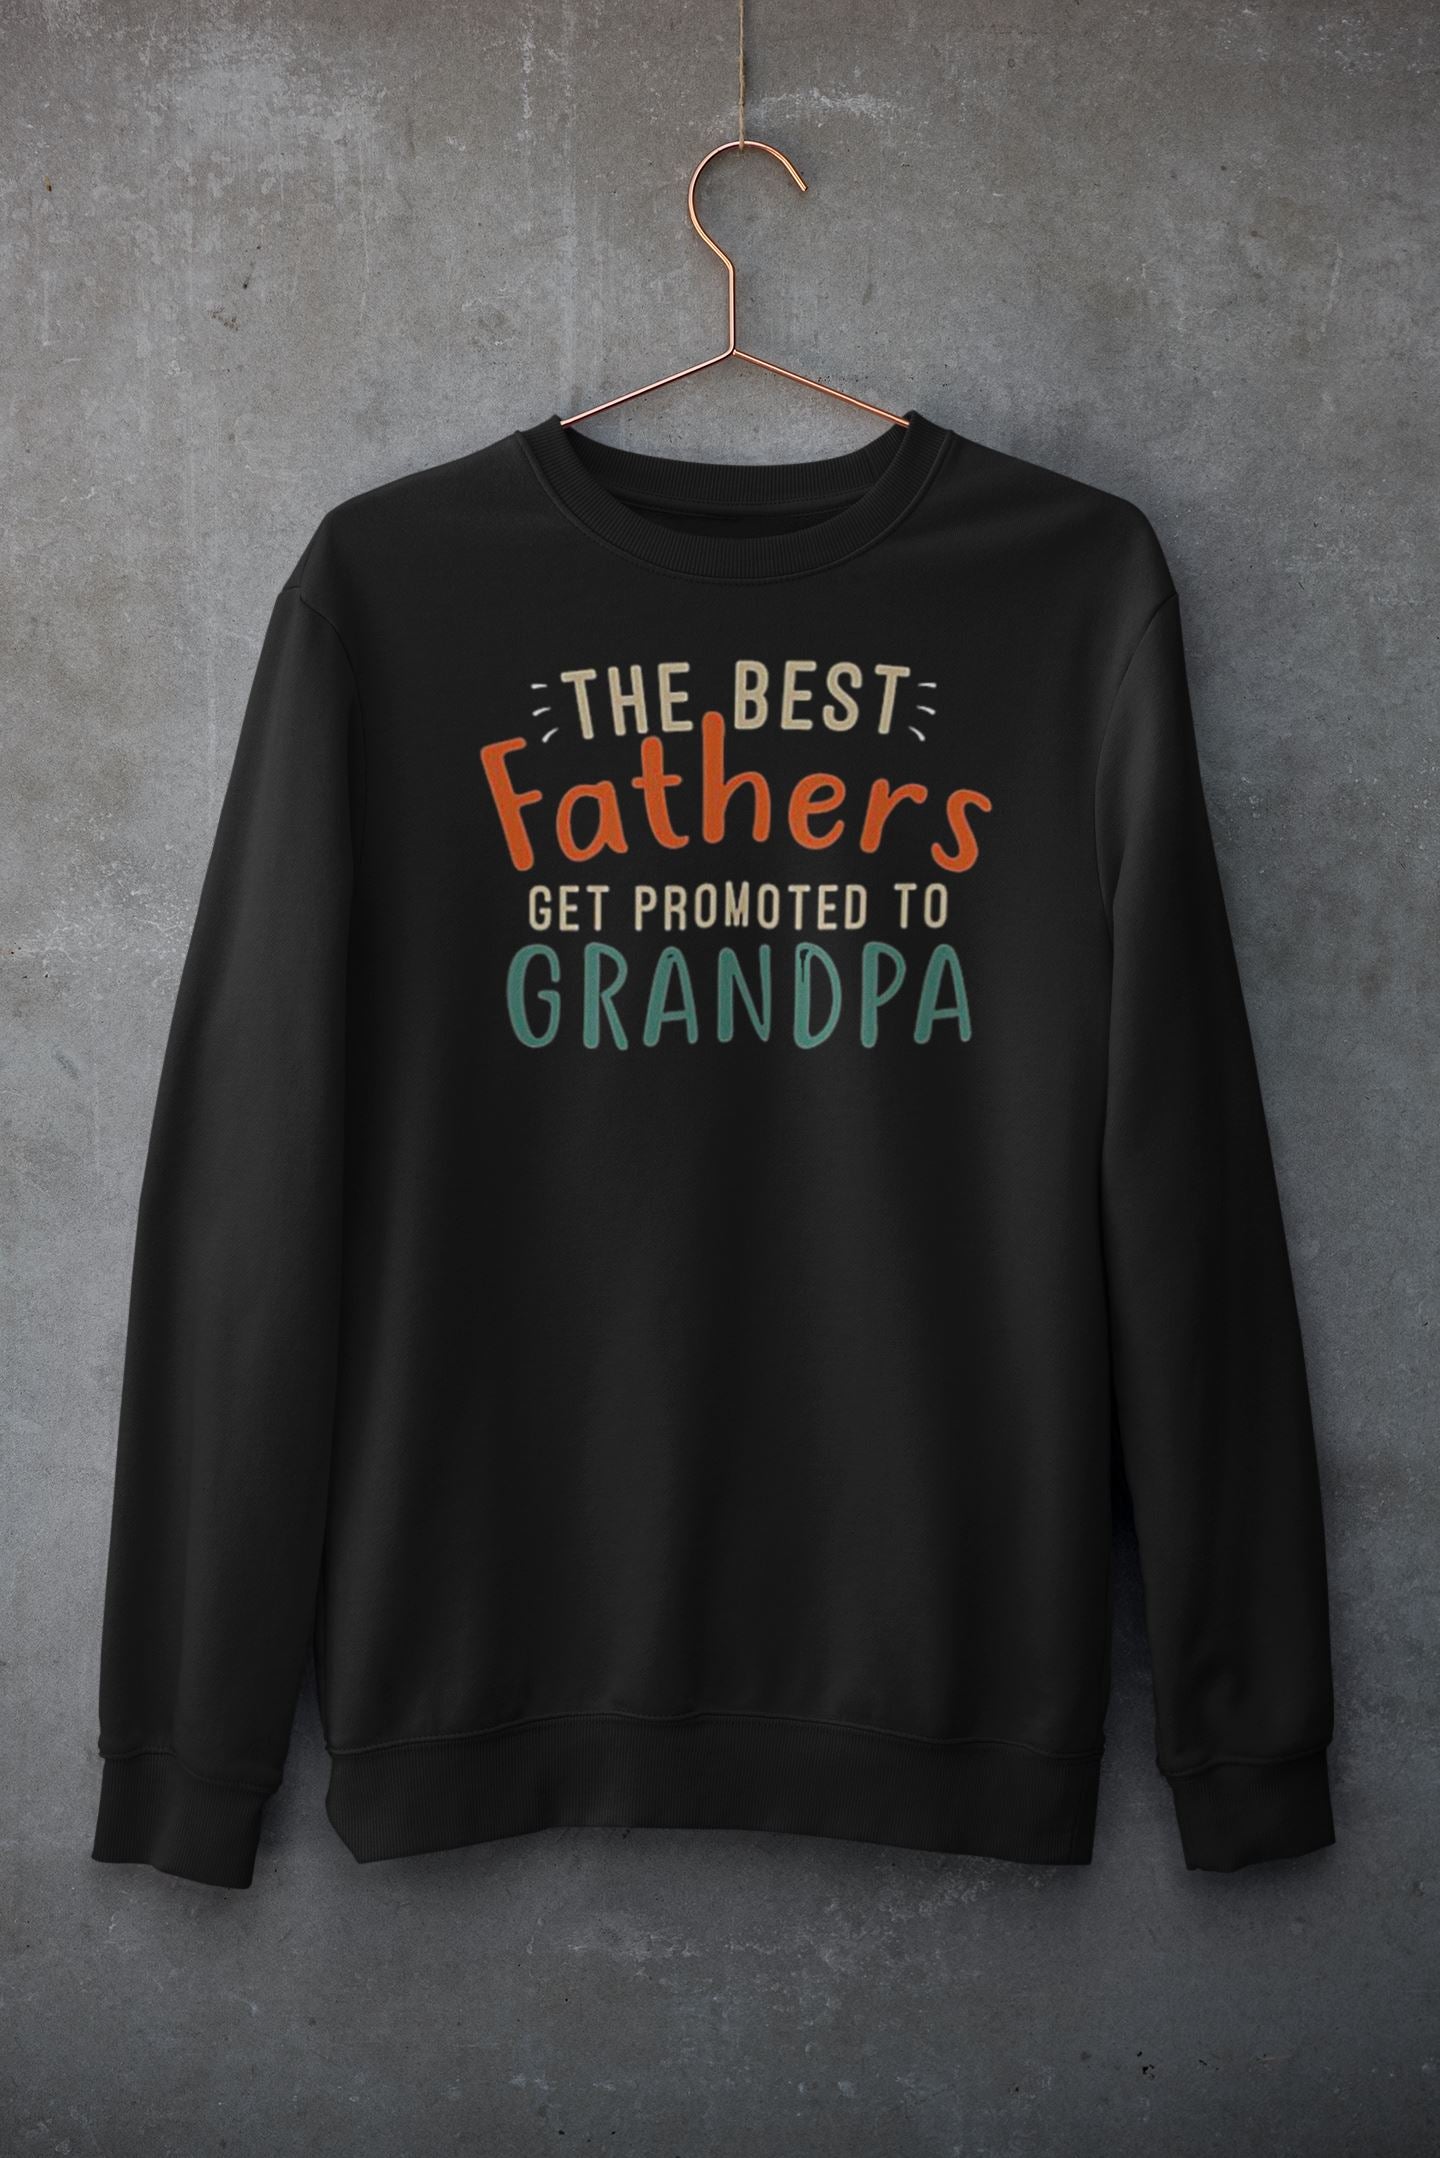 The Best Fathers Get Promoted to Grandpa Black Sweatshirt for Men freeshipping - Catch My Drift India